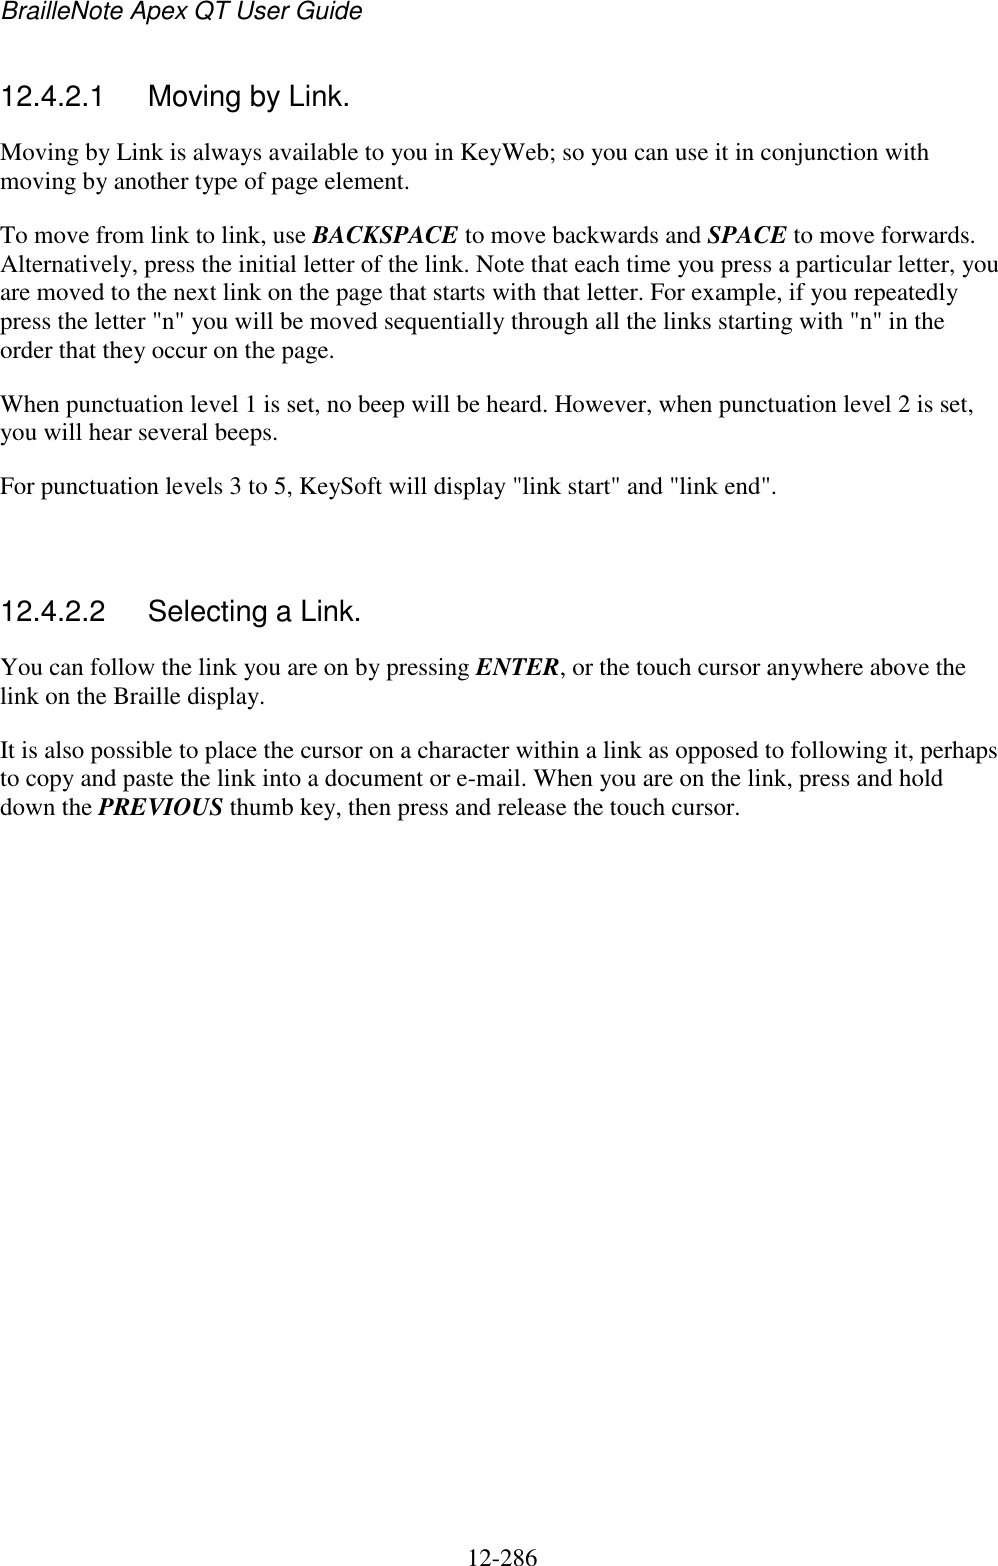 BrailleNote Apex QT User Guide  12-286   12.4.2.1  Moving by Link. Moving by Link is always available to you in KeyWeb; so you can use it in conjunction with moving by another type of page element. To move from link to link, use BACKSPACE to move backwards and SPACE to move forwards. Alternatively, press the initial letter of the link. Note that each time you press a particular letter, you are moved to the next link on the page that starts with that letter. For example, if you repeatedly press the letter &quot;n&quot; you will be moved sequentially through all the links starting with &quot;n&quot; in the order that they occur on the page. When punctuation level 1 is set, no beep will be heard. However, when punctuation level 2 is set, you will hear several beeps. For punctuation levels 3 to 5, KeySoft will display &quot;link start&quot; and &quot;link end&quot;.   12.4.2.2  Selecting a Link. You can follow the link you are on by pressing ENTER, or the touch cursor anywhere above the link on the Braille display. It is also possible to place the cursor on a character within a link as opposed to following it, perhaps to copy and paste the link into a document or e-mail. When you are on the link, press and hold down the PREVIOUS thumb key, then press and release the touch cursor.   